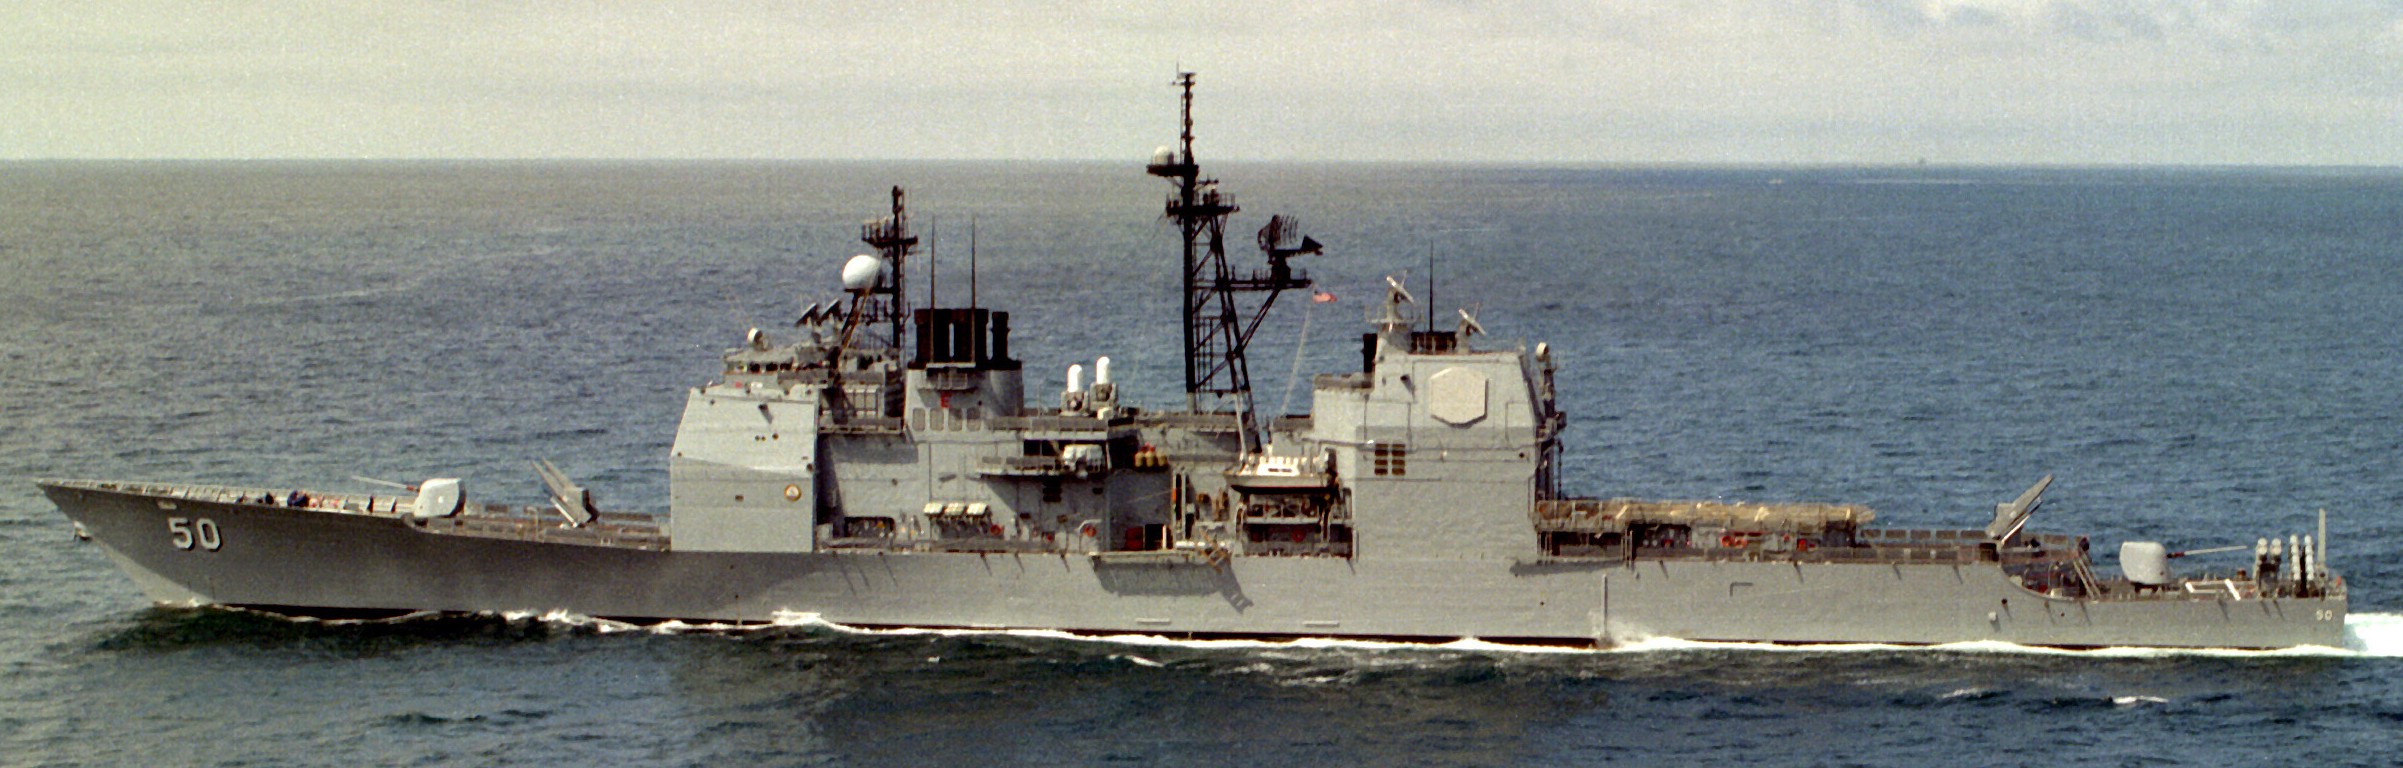 cg-50 uss valley forge ticonderoga class guided missile cruiser aegis us navy 35